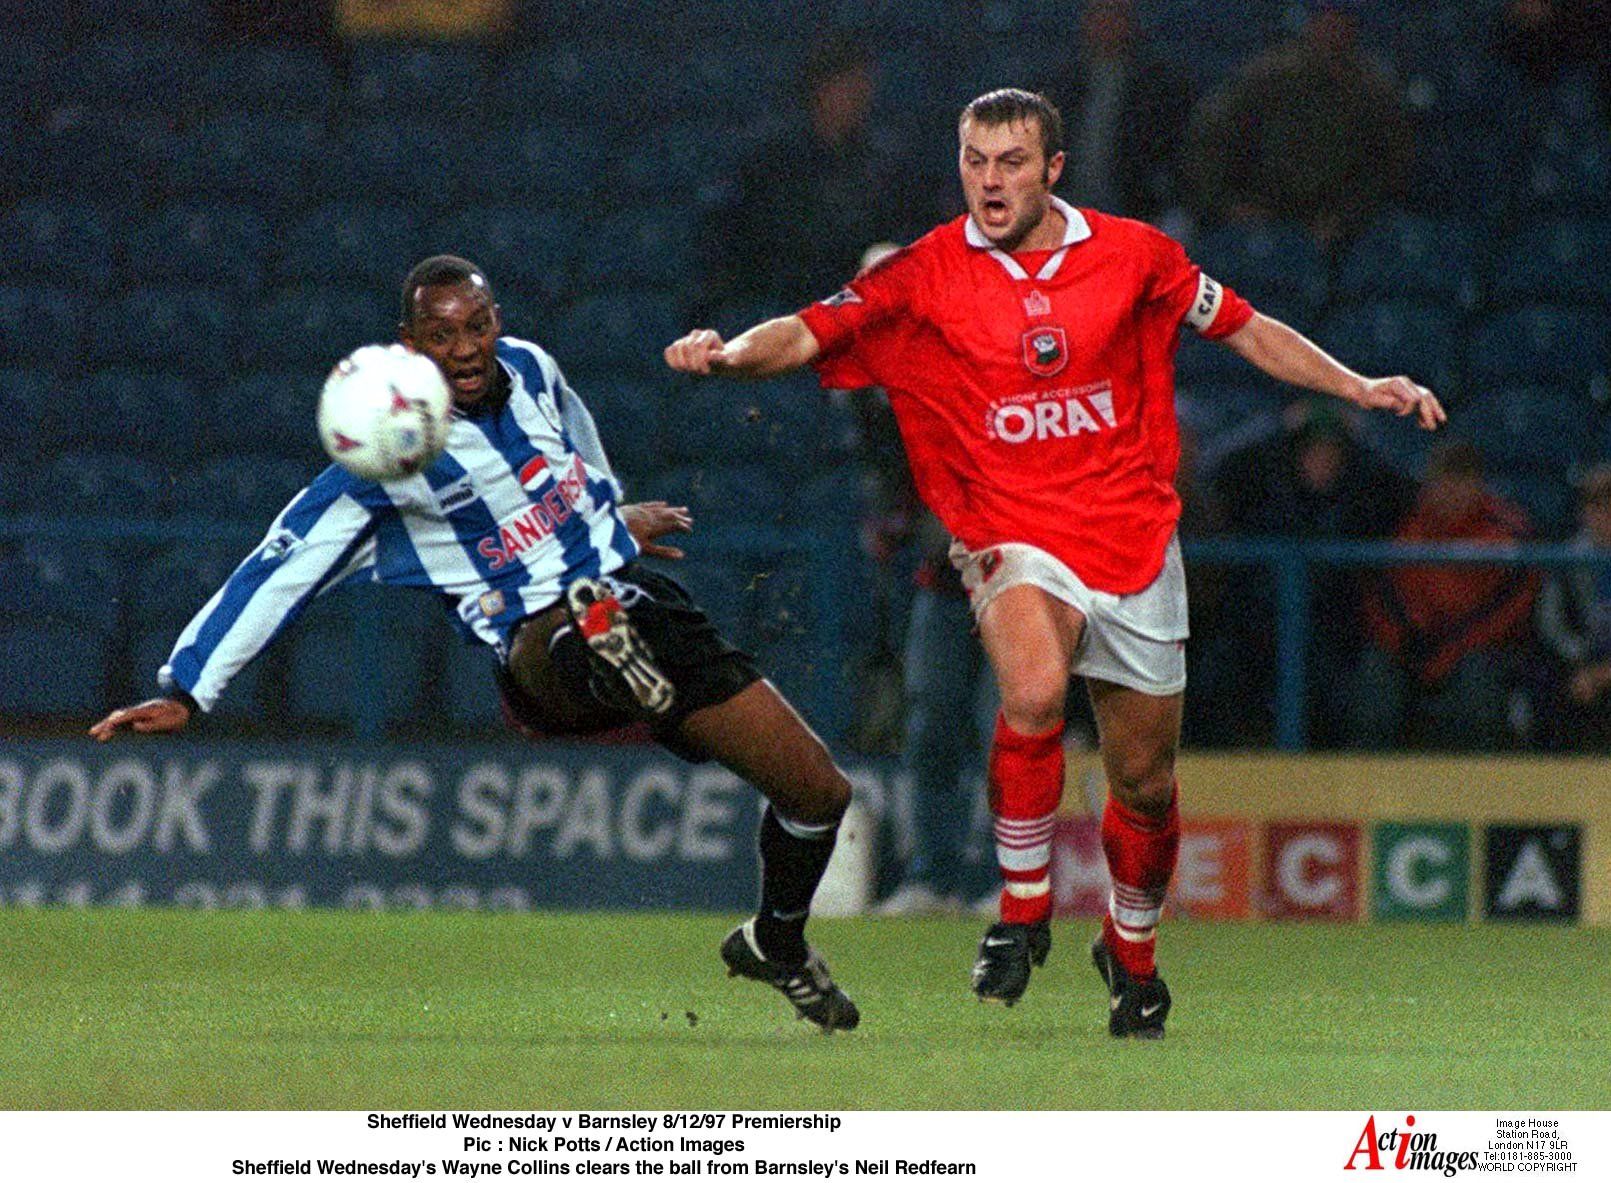 Sheffield Wednesday v Barnsley 8/12/97 Premiership 
Pic : Nick Potts / Action Images 
Sheffield Wednesday's Wayne Collins clears the ball from Barnsley's Neil Redfearn